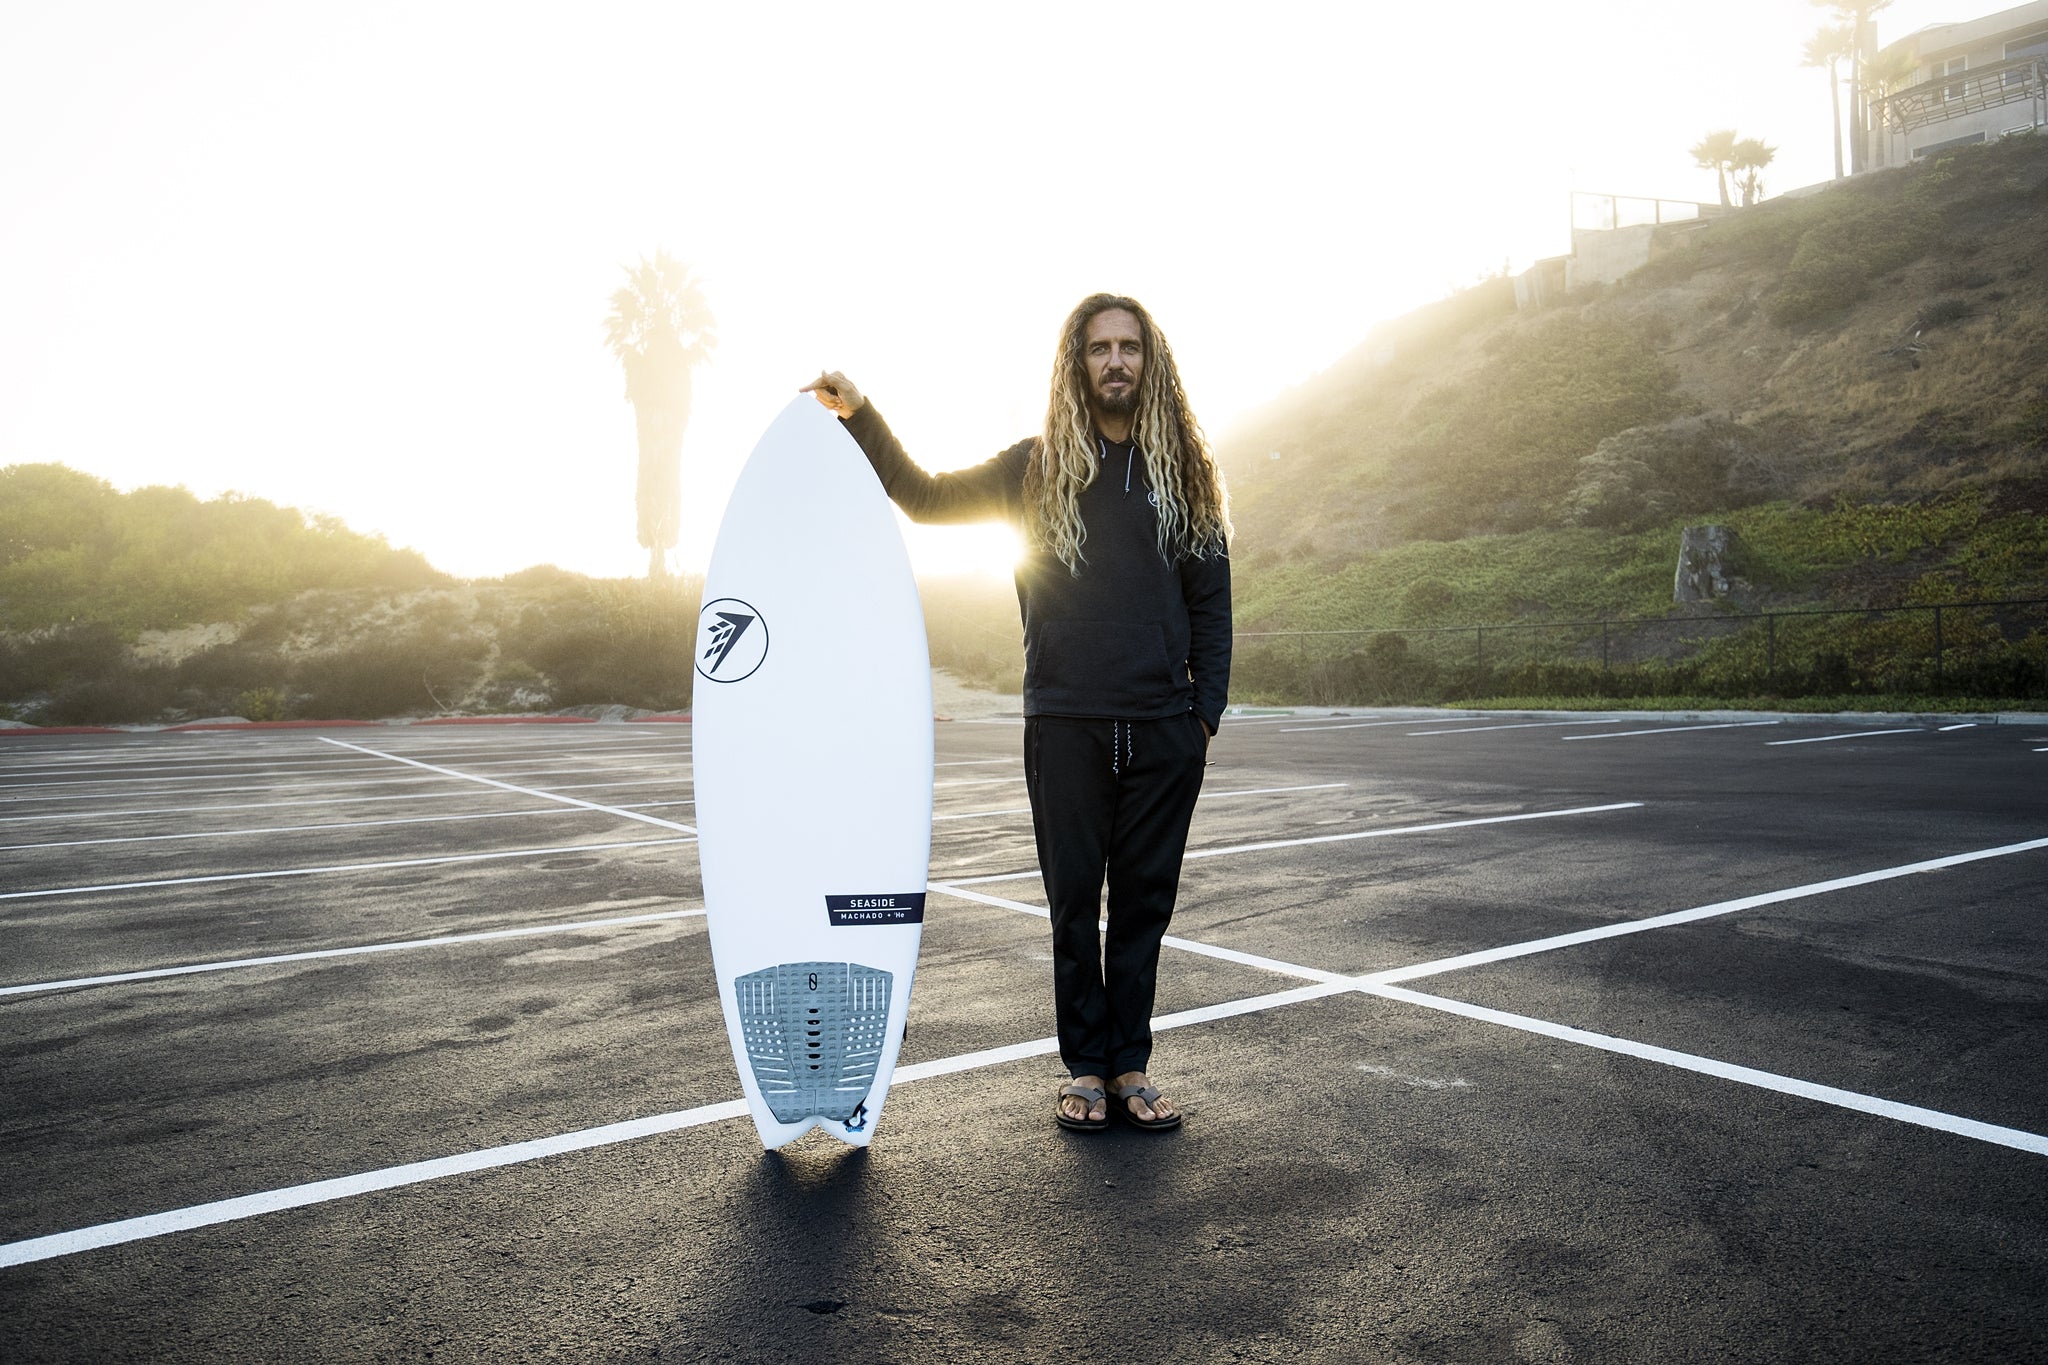 Firewire Surfboards Build-To-Order